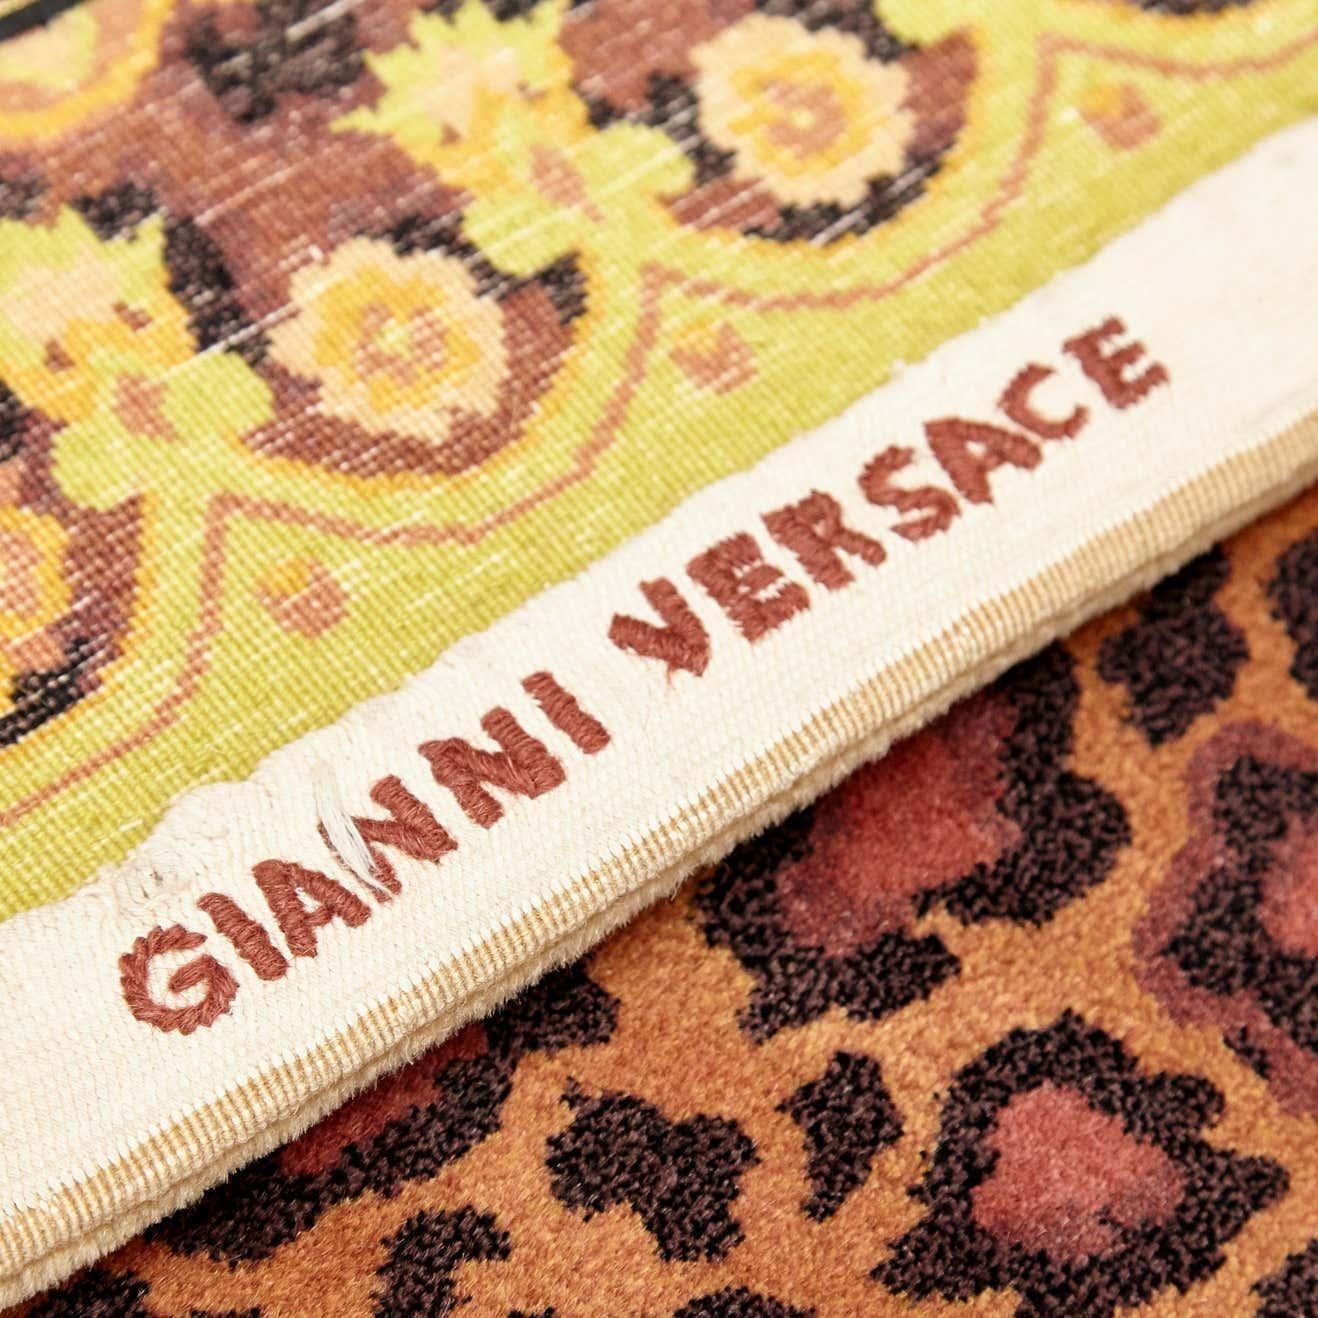 Gianni Versace Collection Rug Wild Barocco, Gold Leopard Animal Print, 1980 For Sale 7